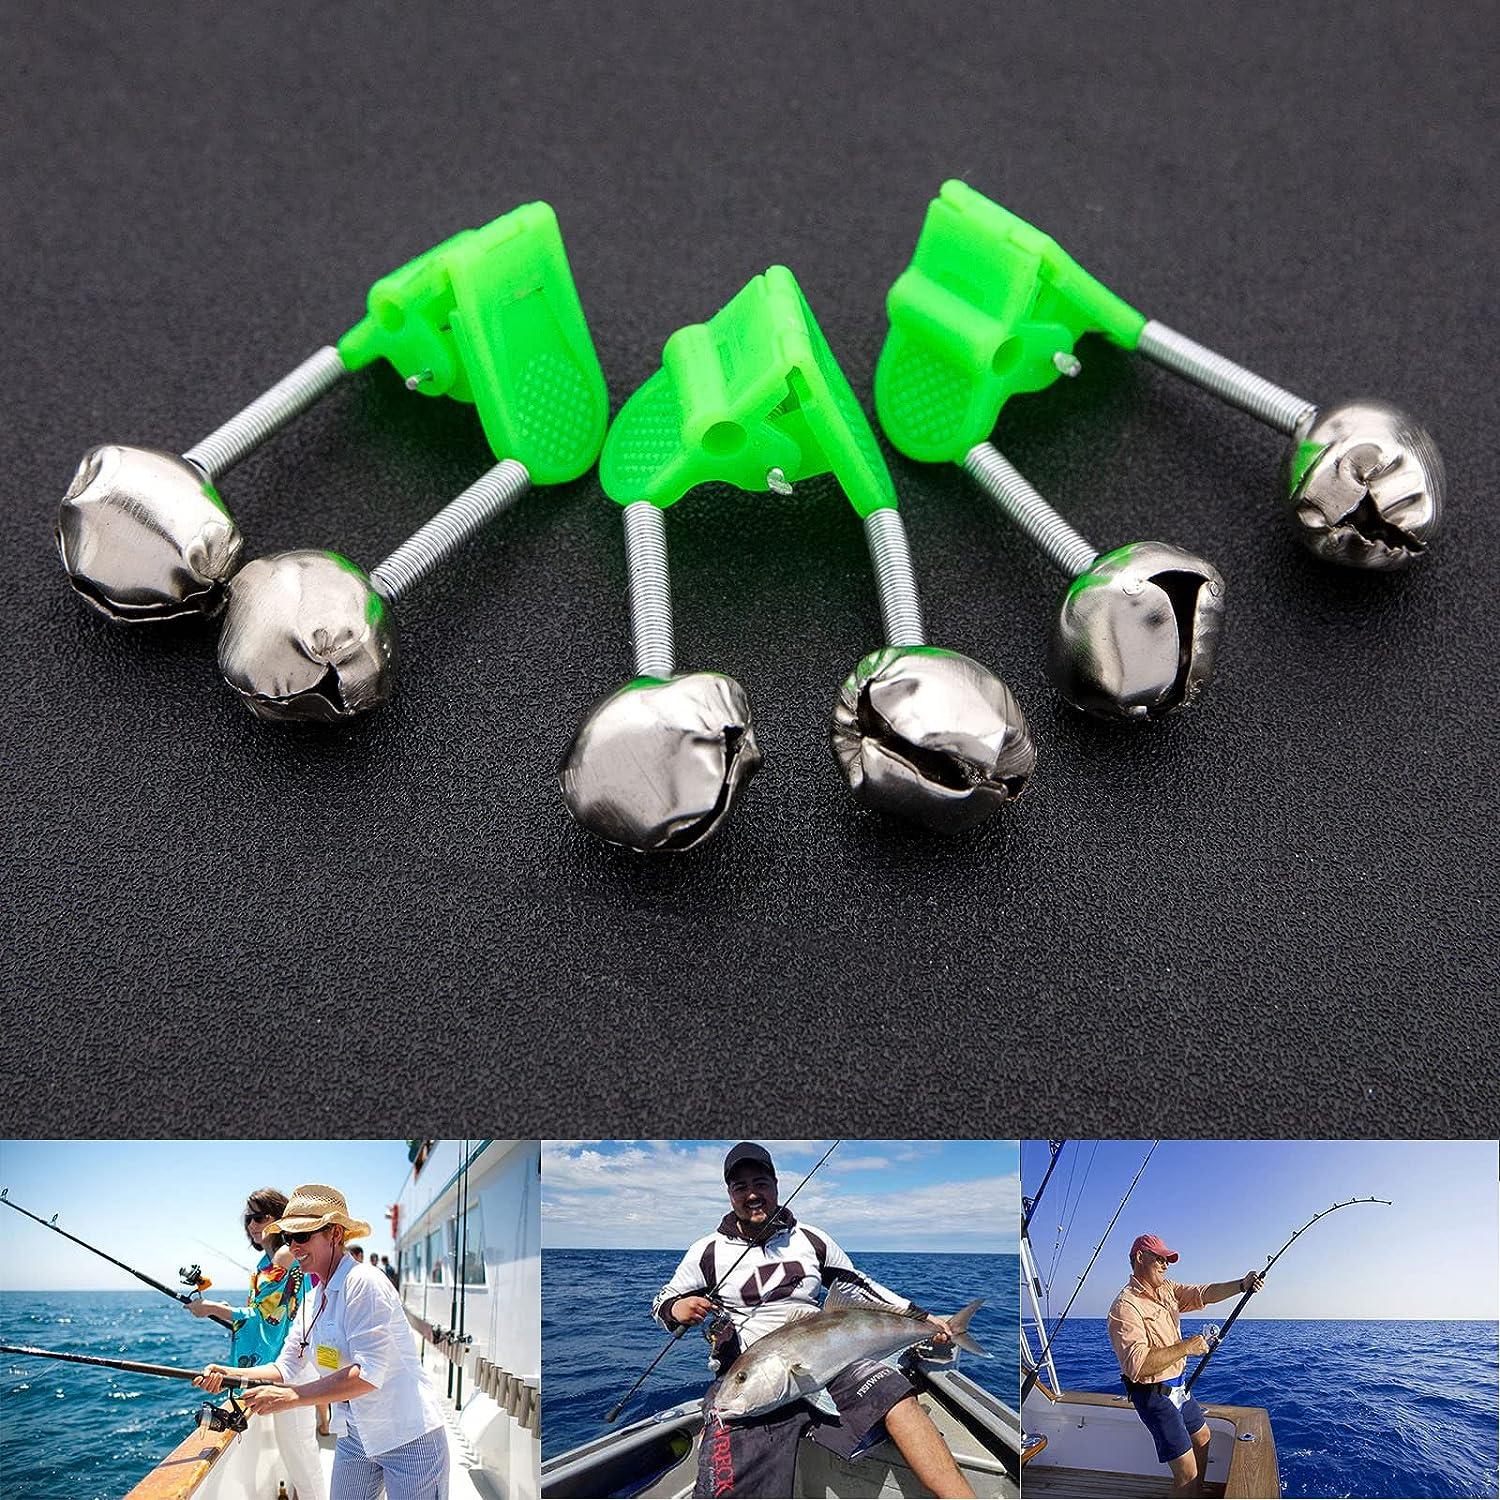 Silver fishing bells are worn on a fishing rod while fishing. Bite